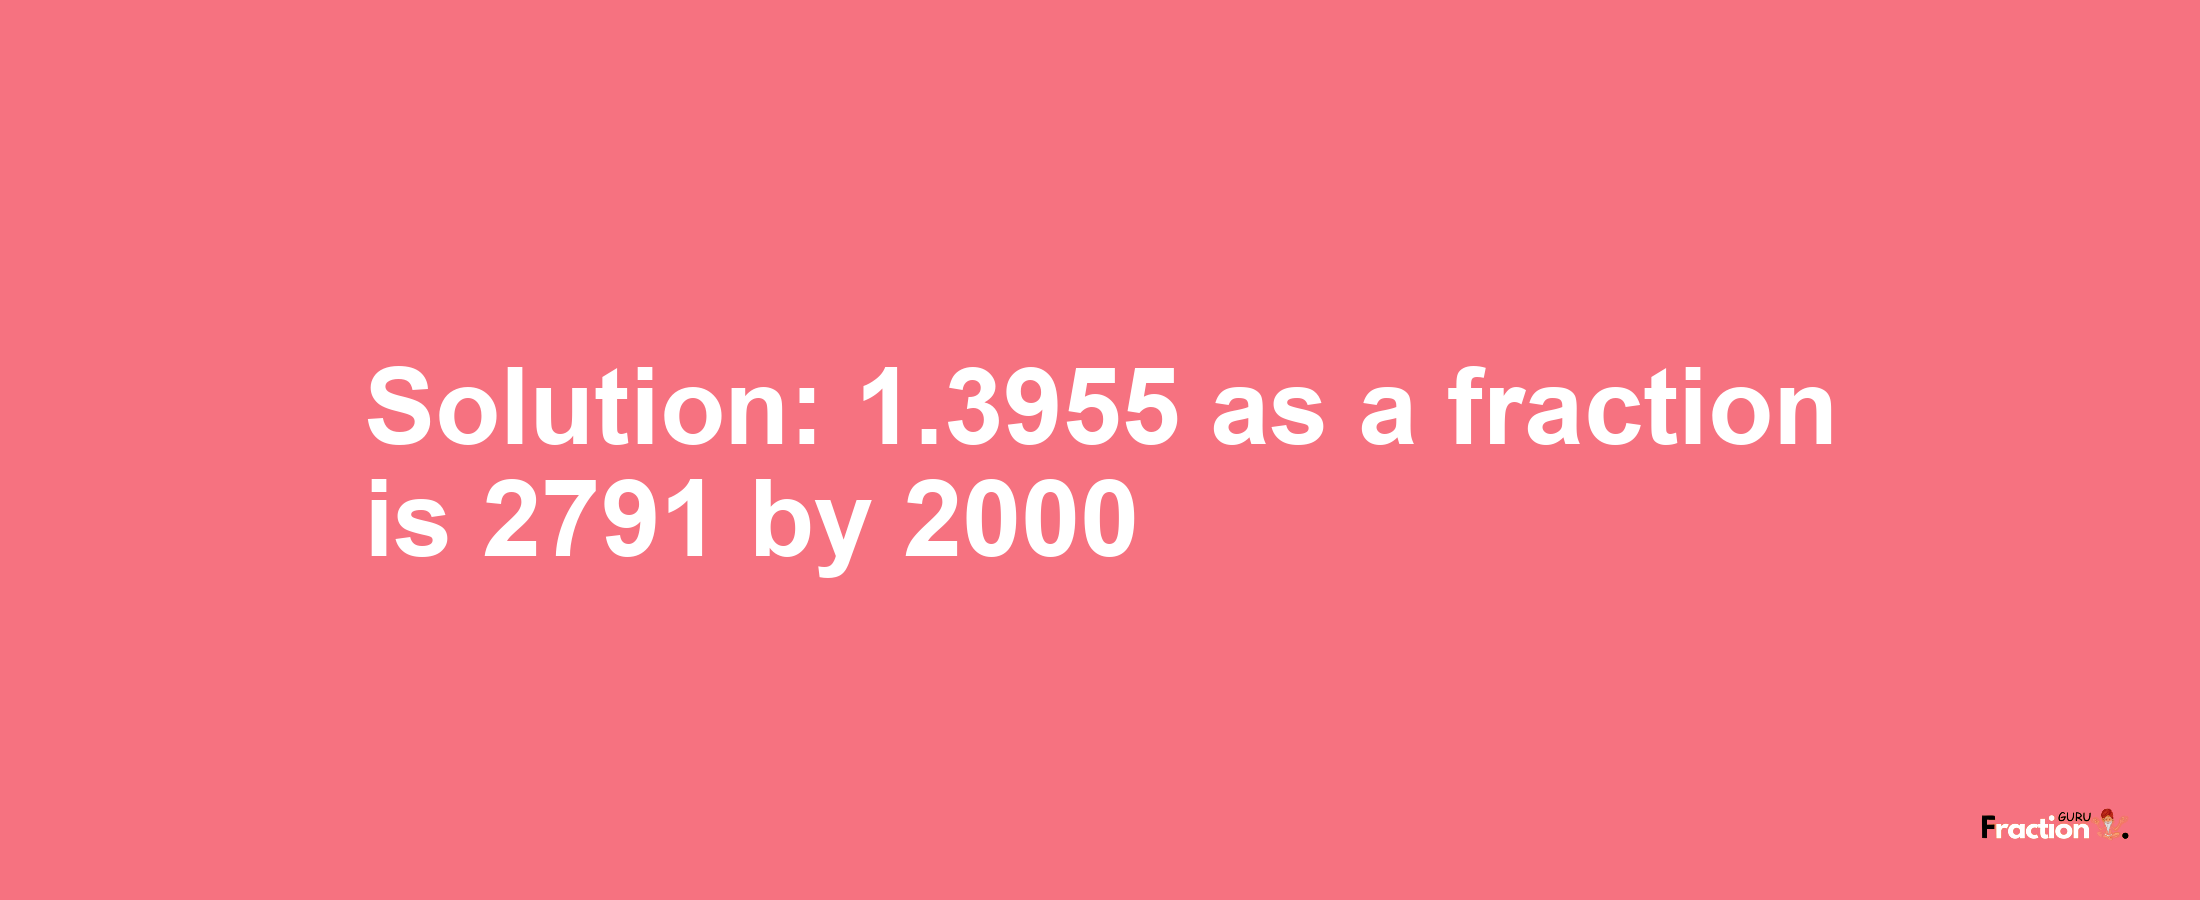 Solution:1.3955 as a fraction is 2791/2000